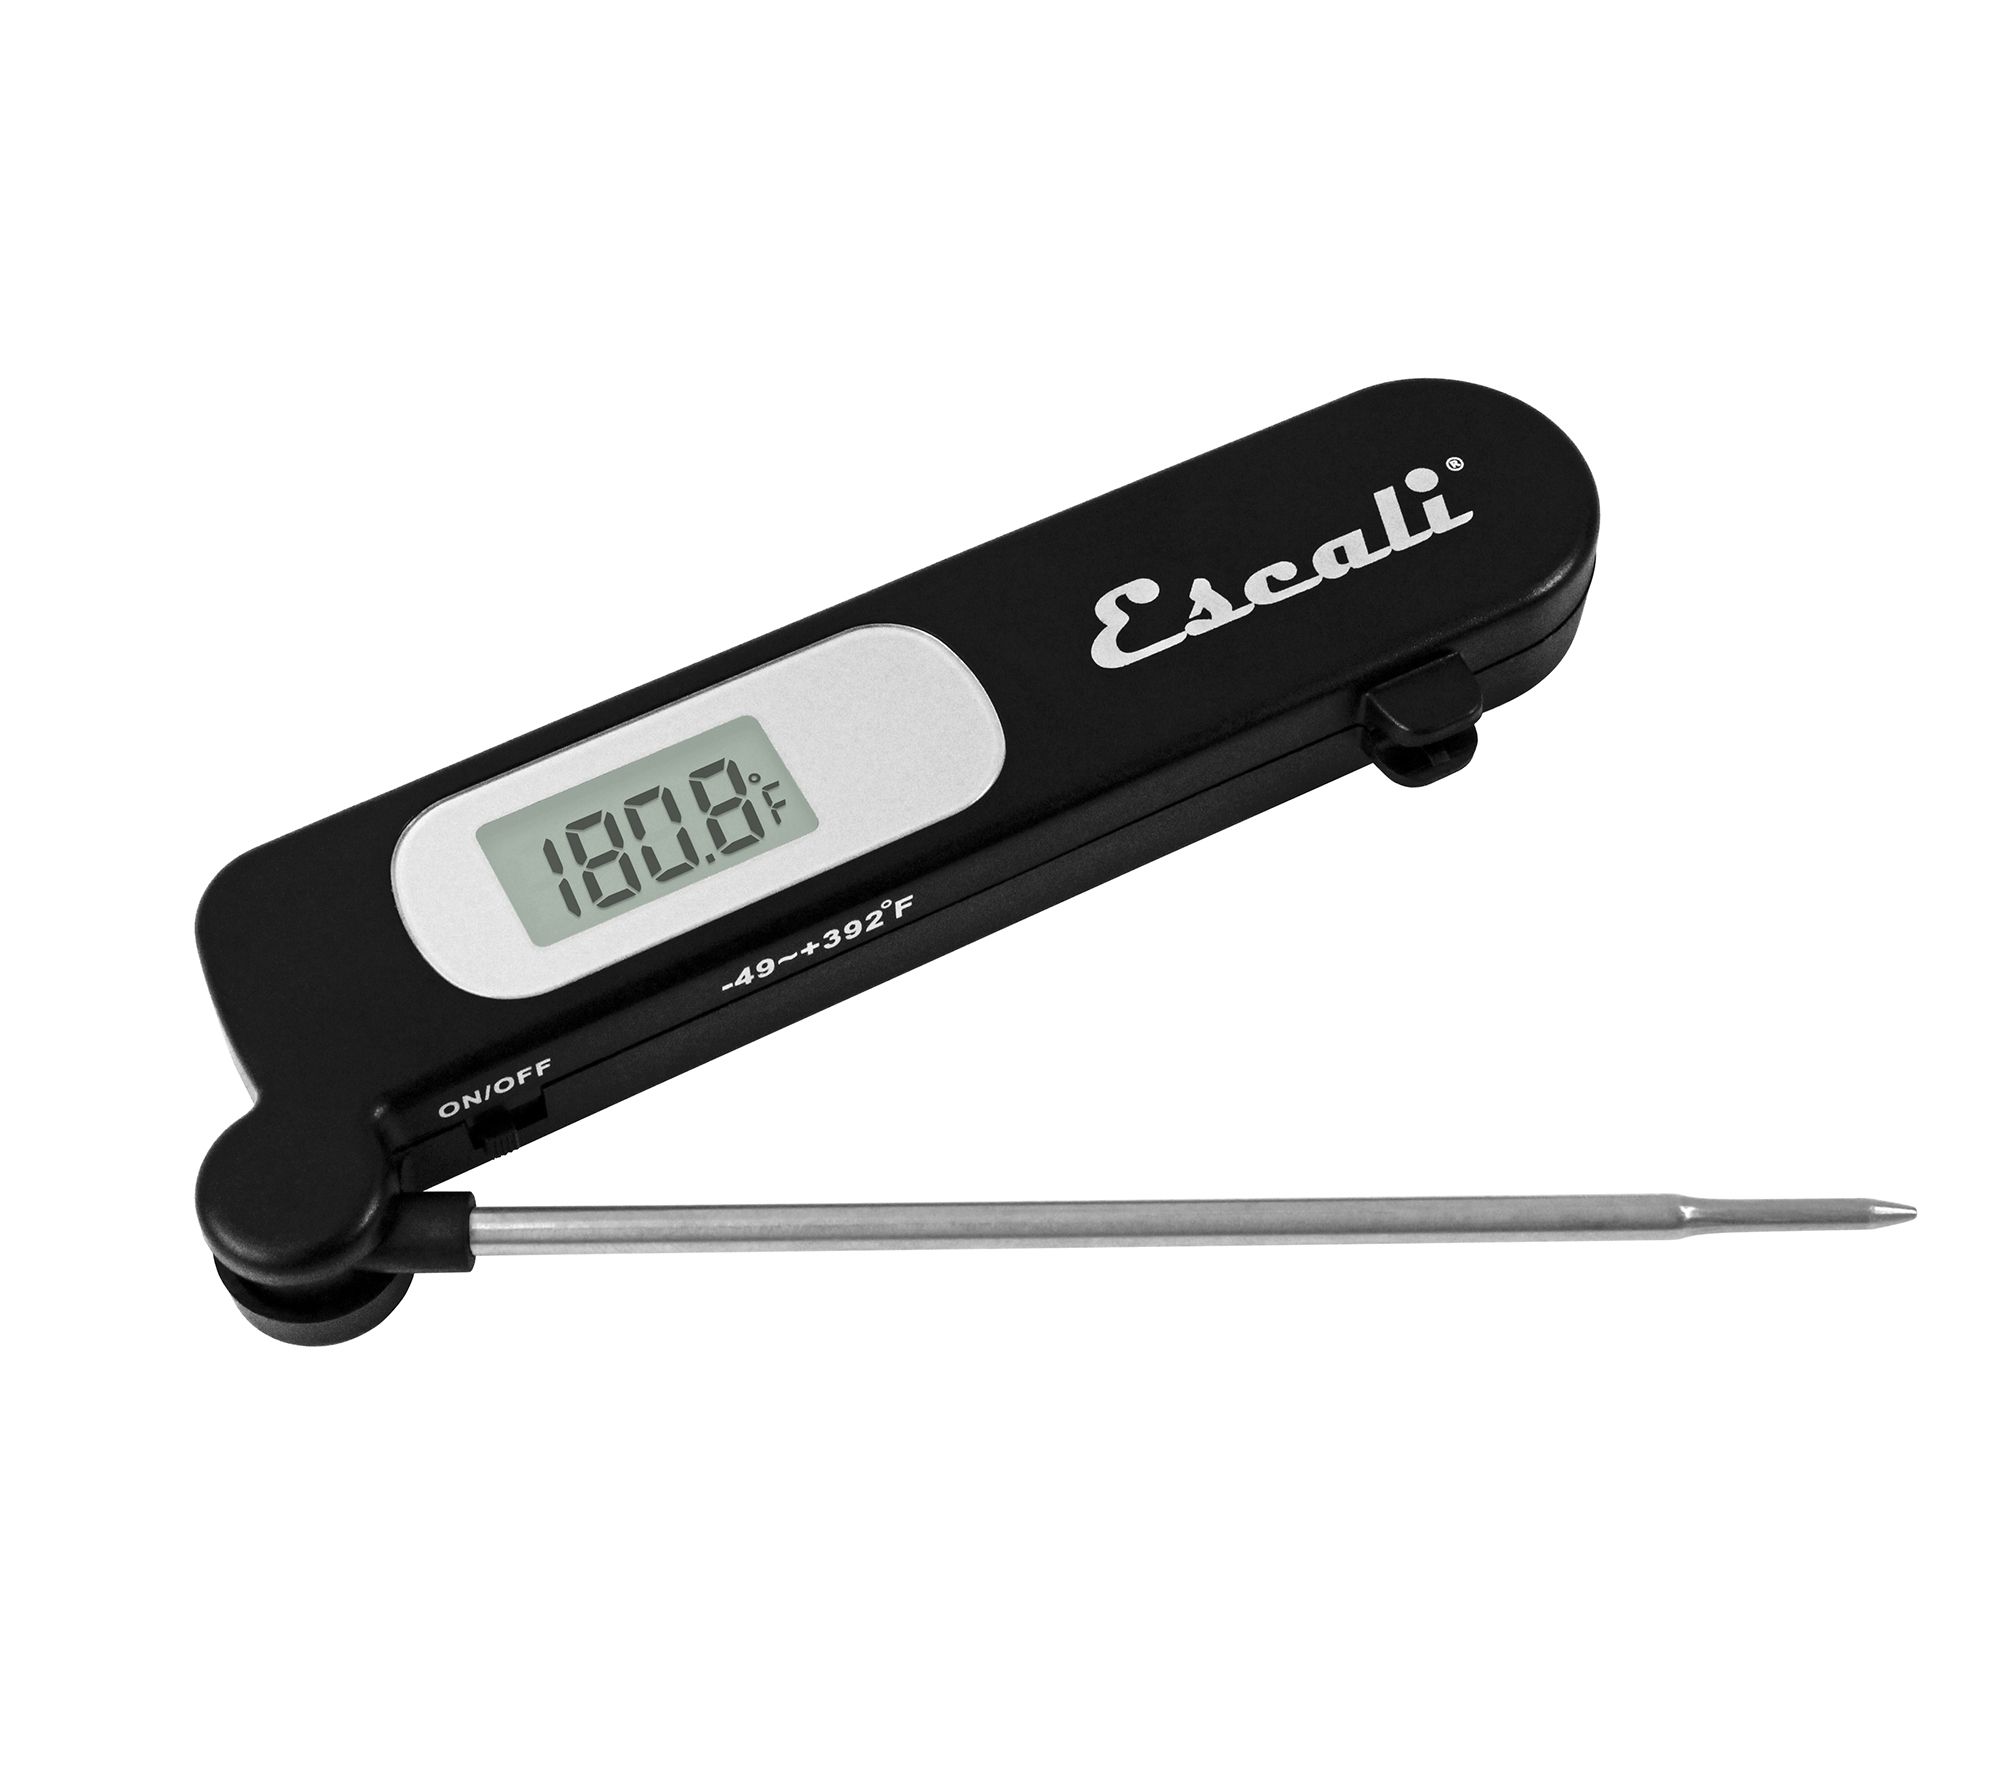 BIOS Professional Meat and Poultry Thermometer, White